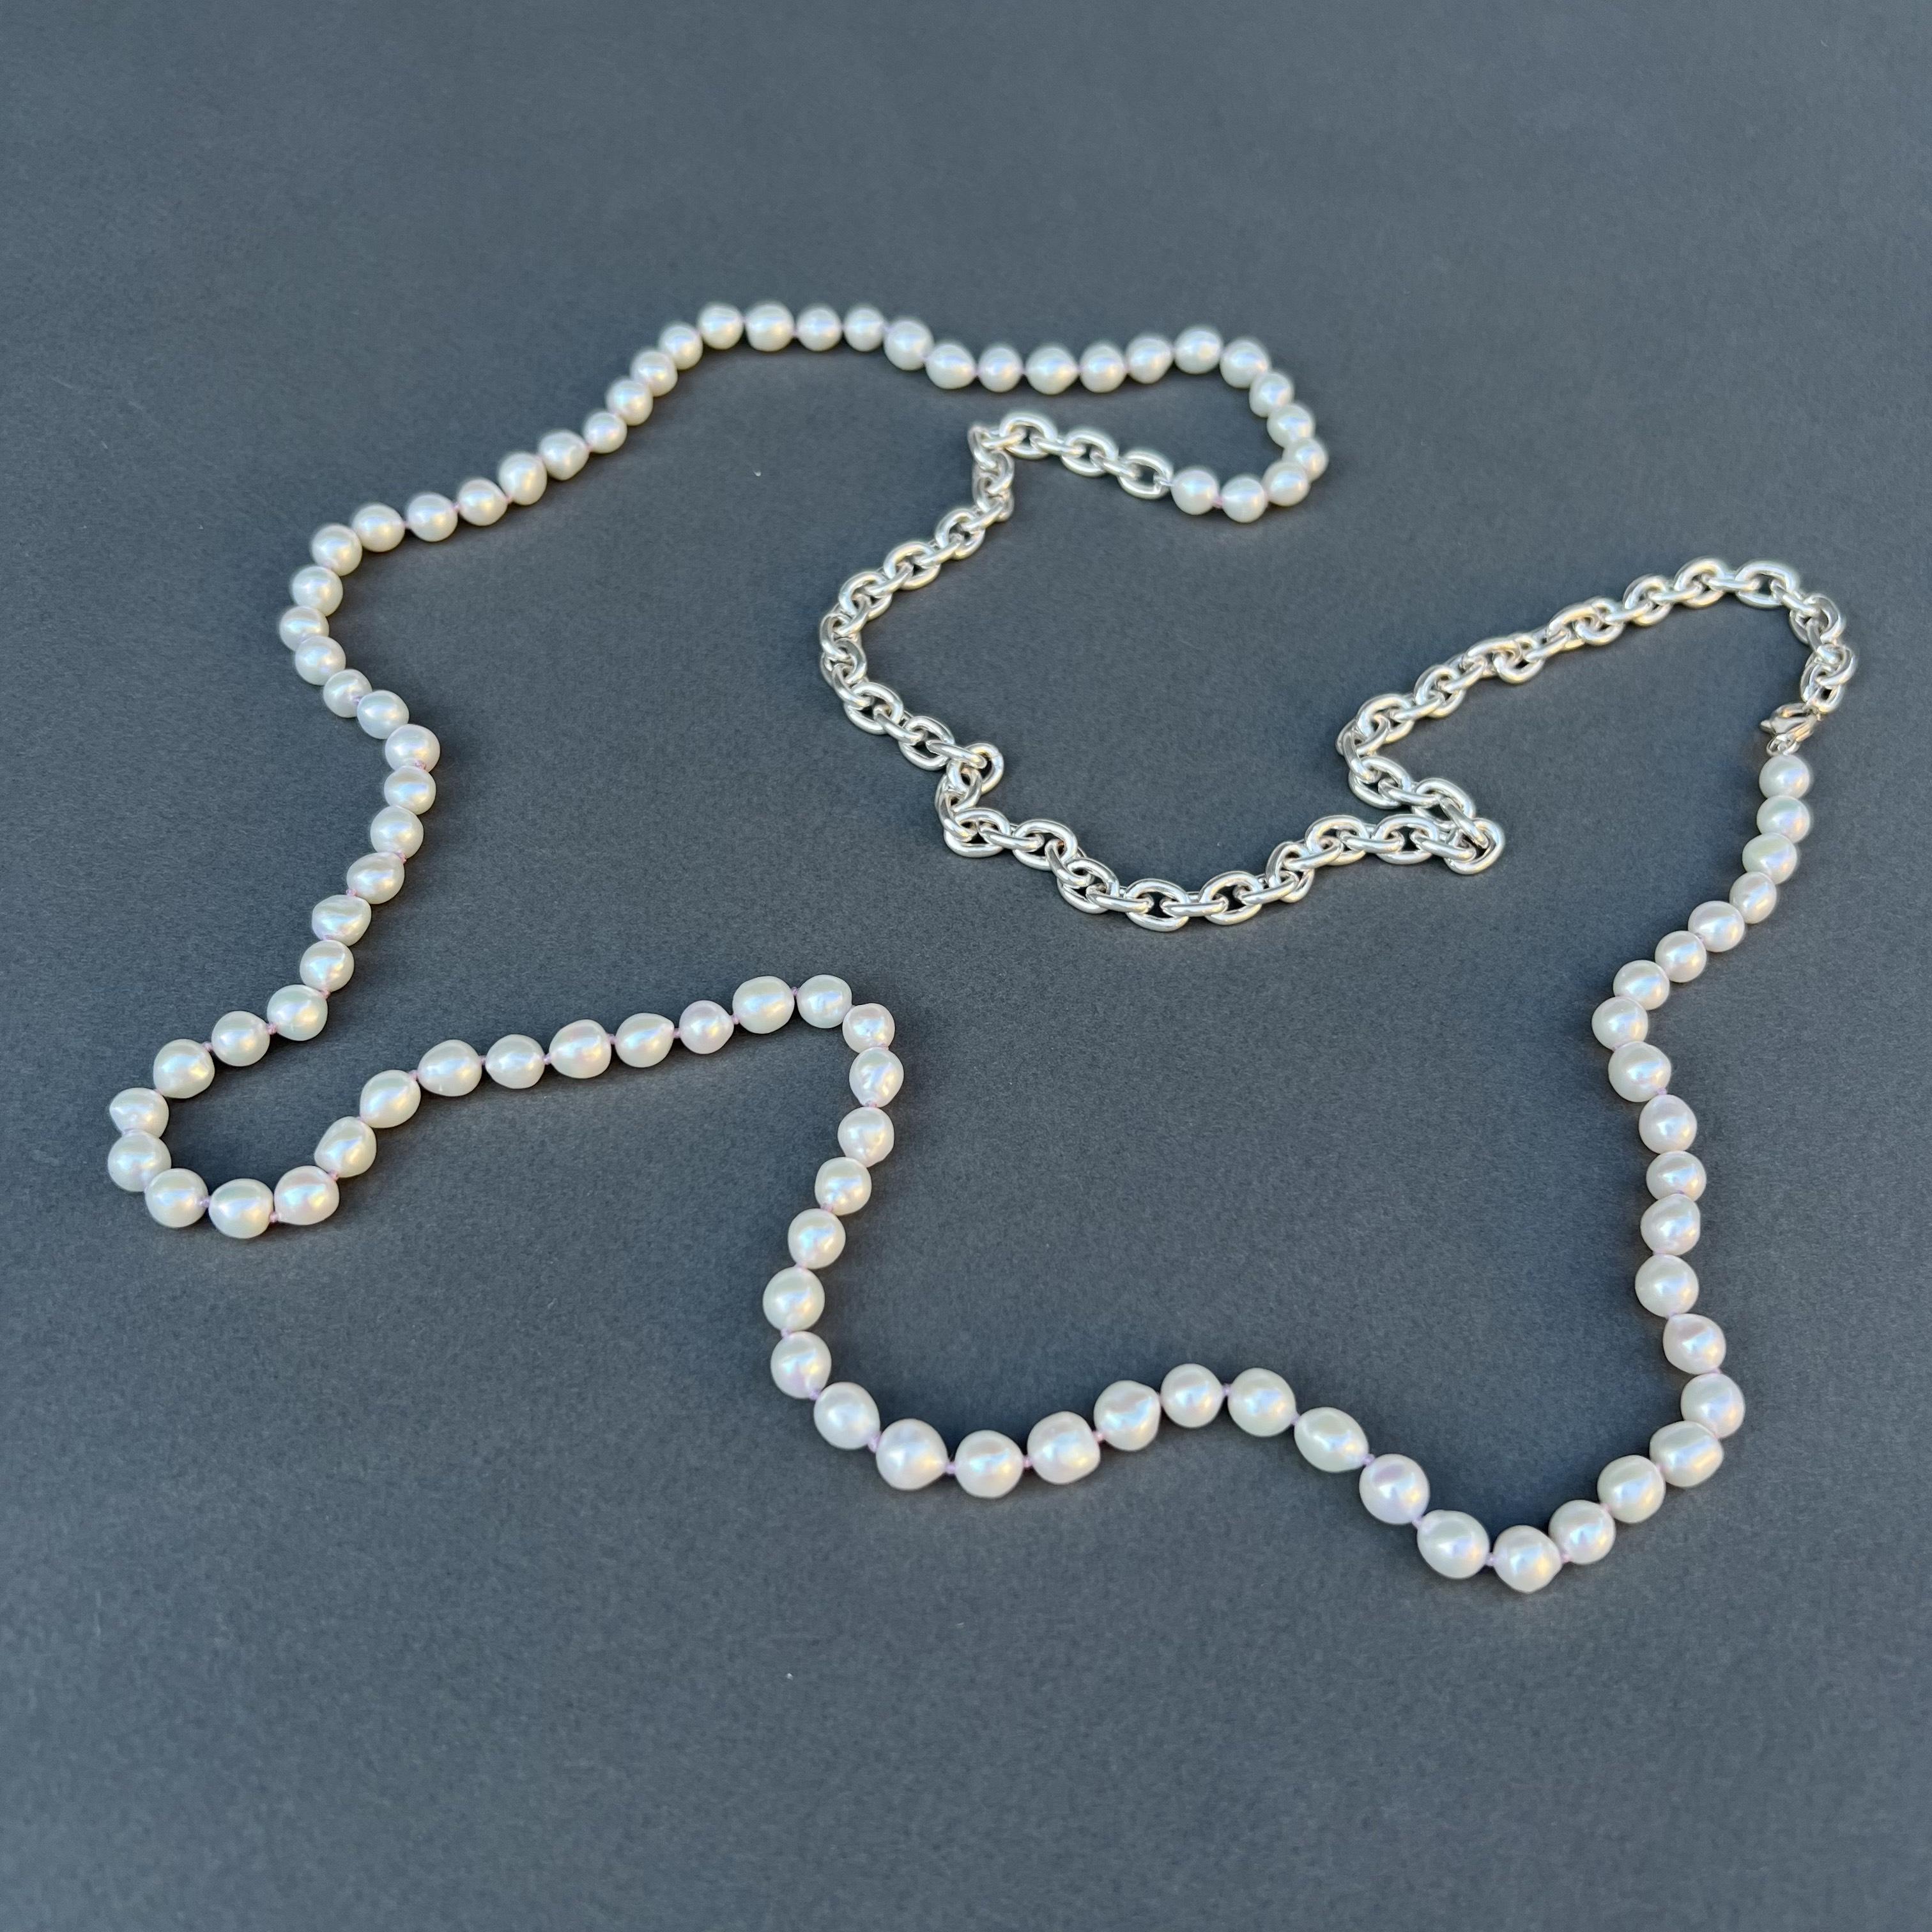 Women's White Pearl Silver Chain Necklace J Dauphin For Sale